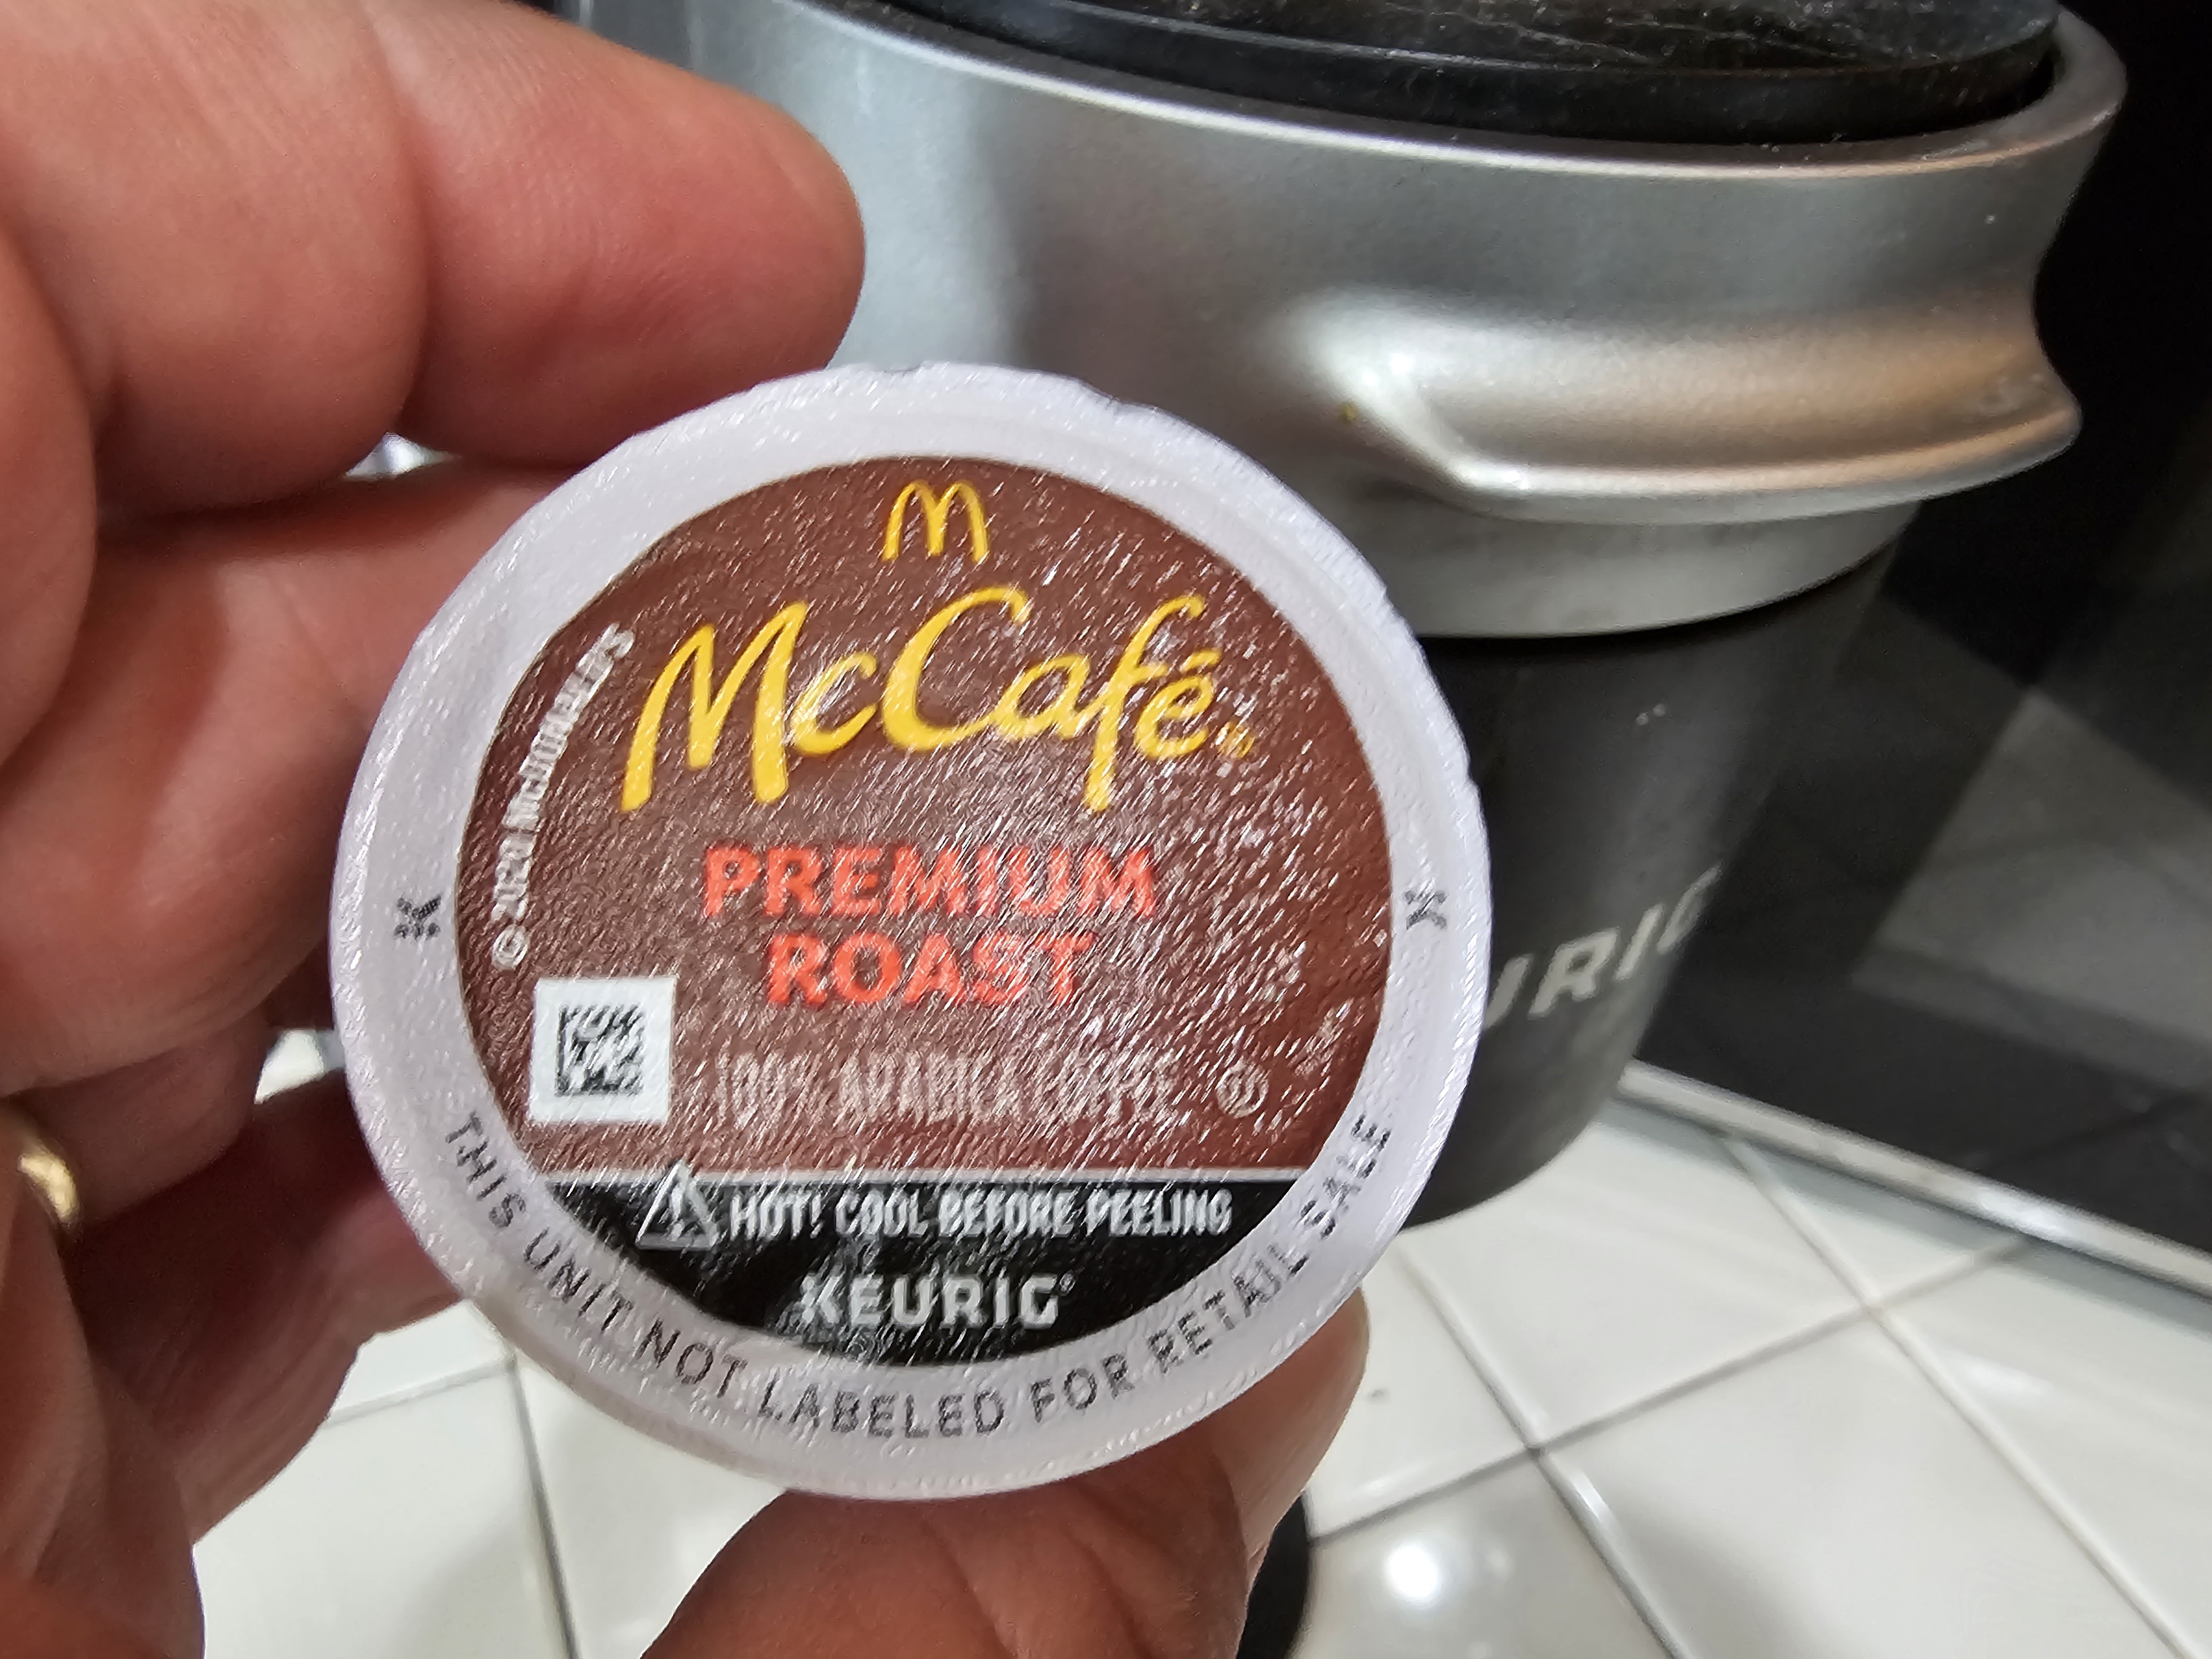 Picture of a McDonald's coffee pod